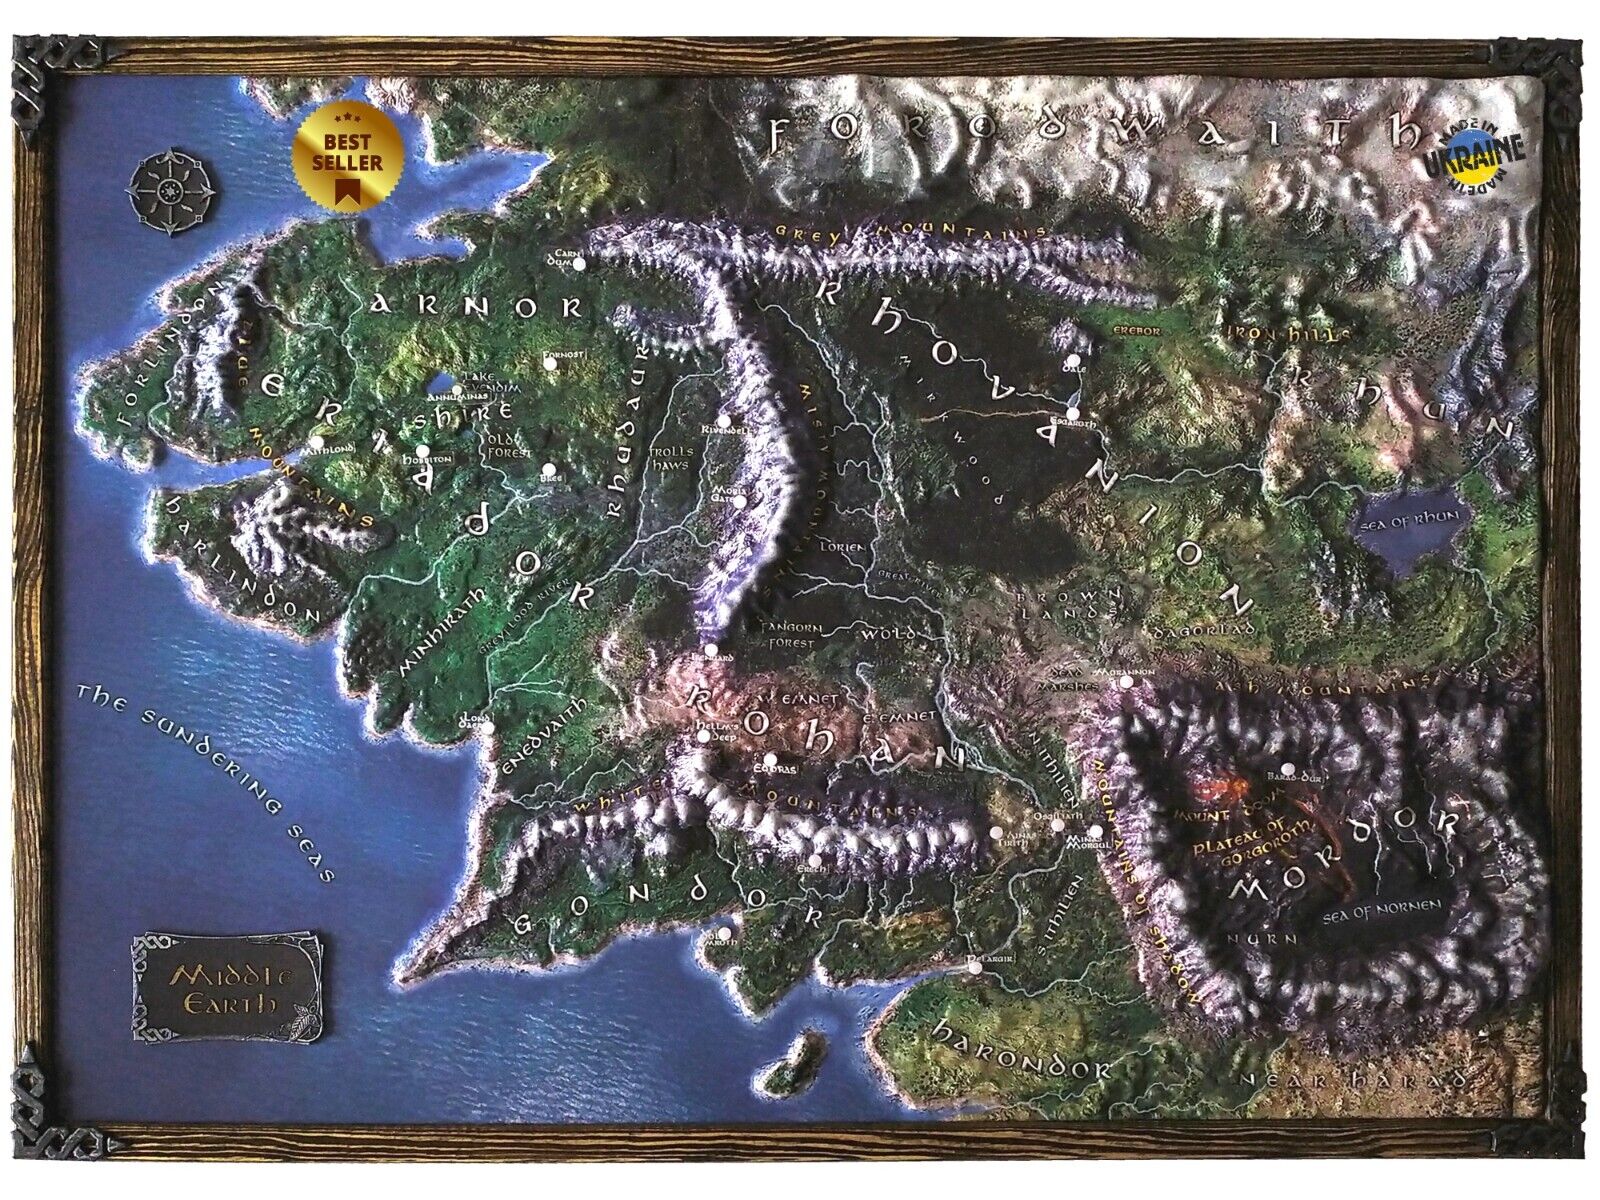 The Lord of the Rings 3D Map: A Middle-earth Masterpiece by J.R.R. Tolkien